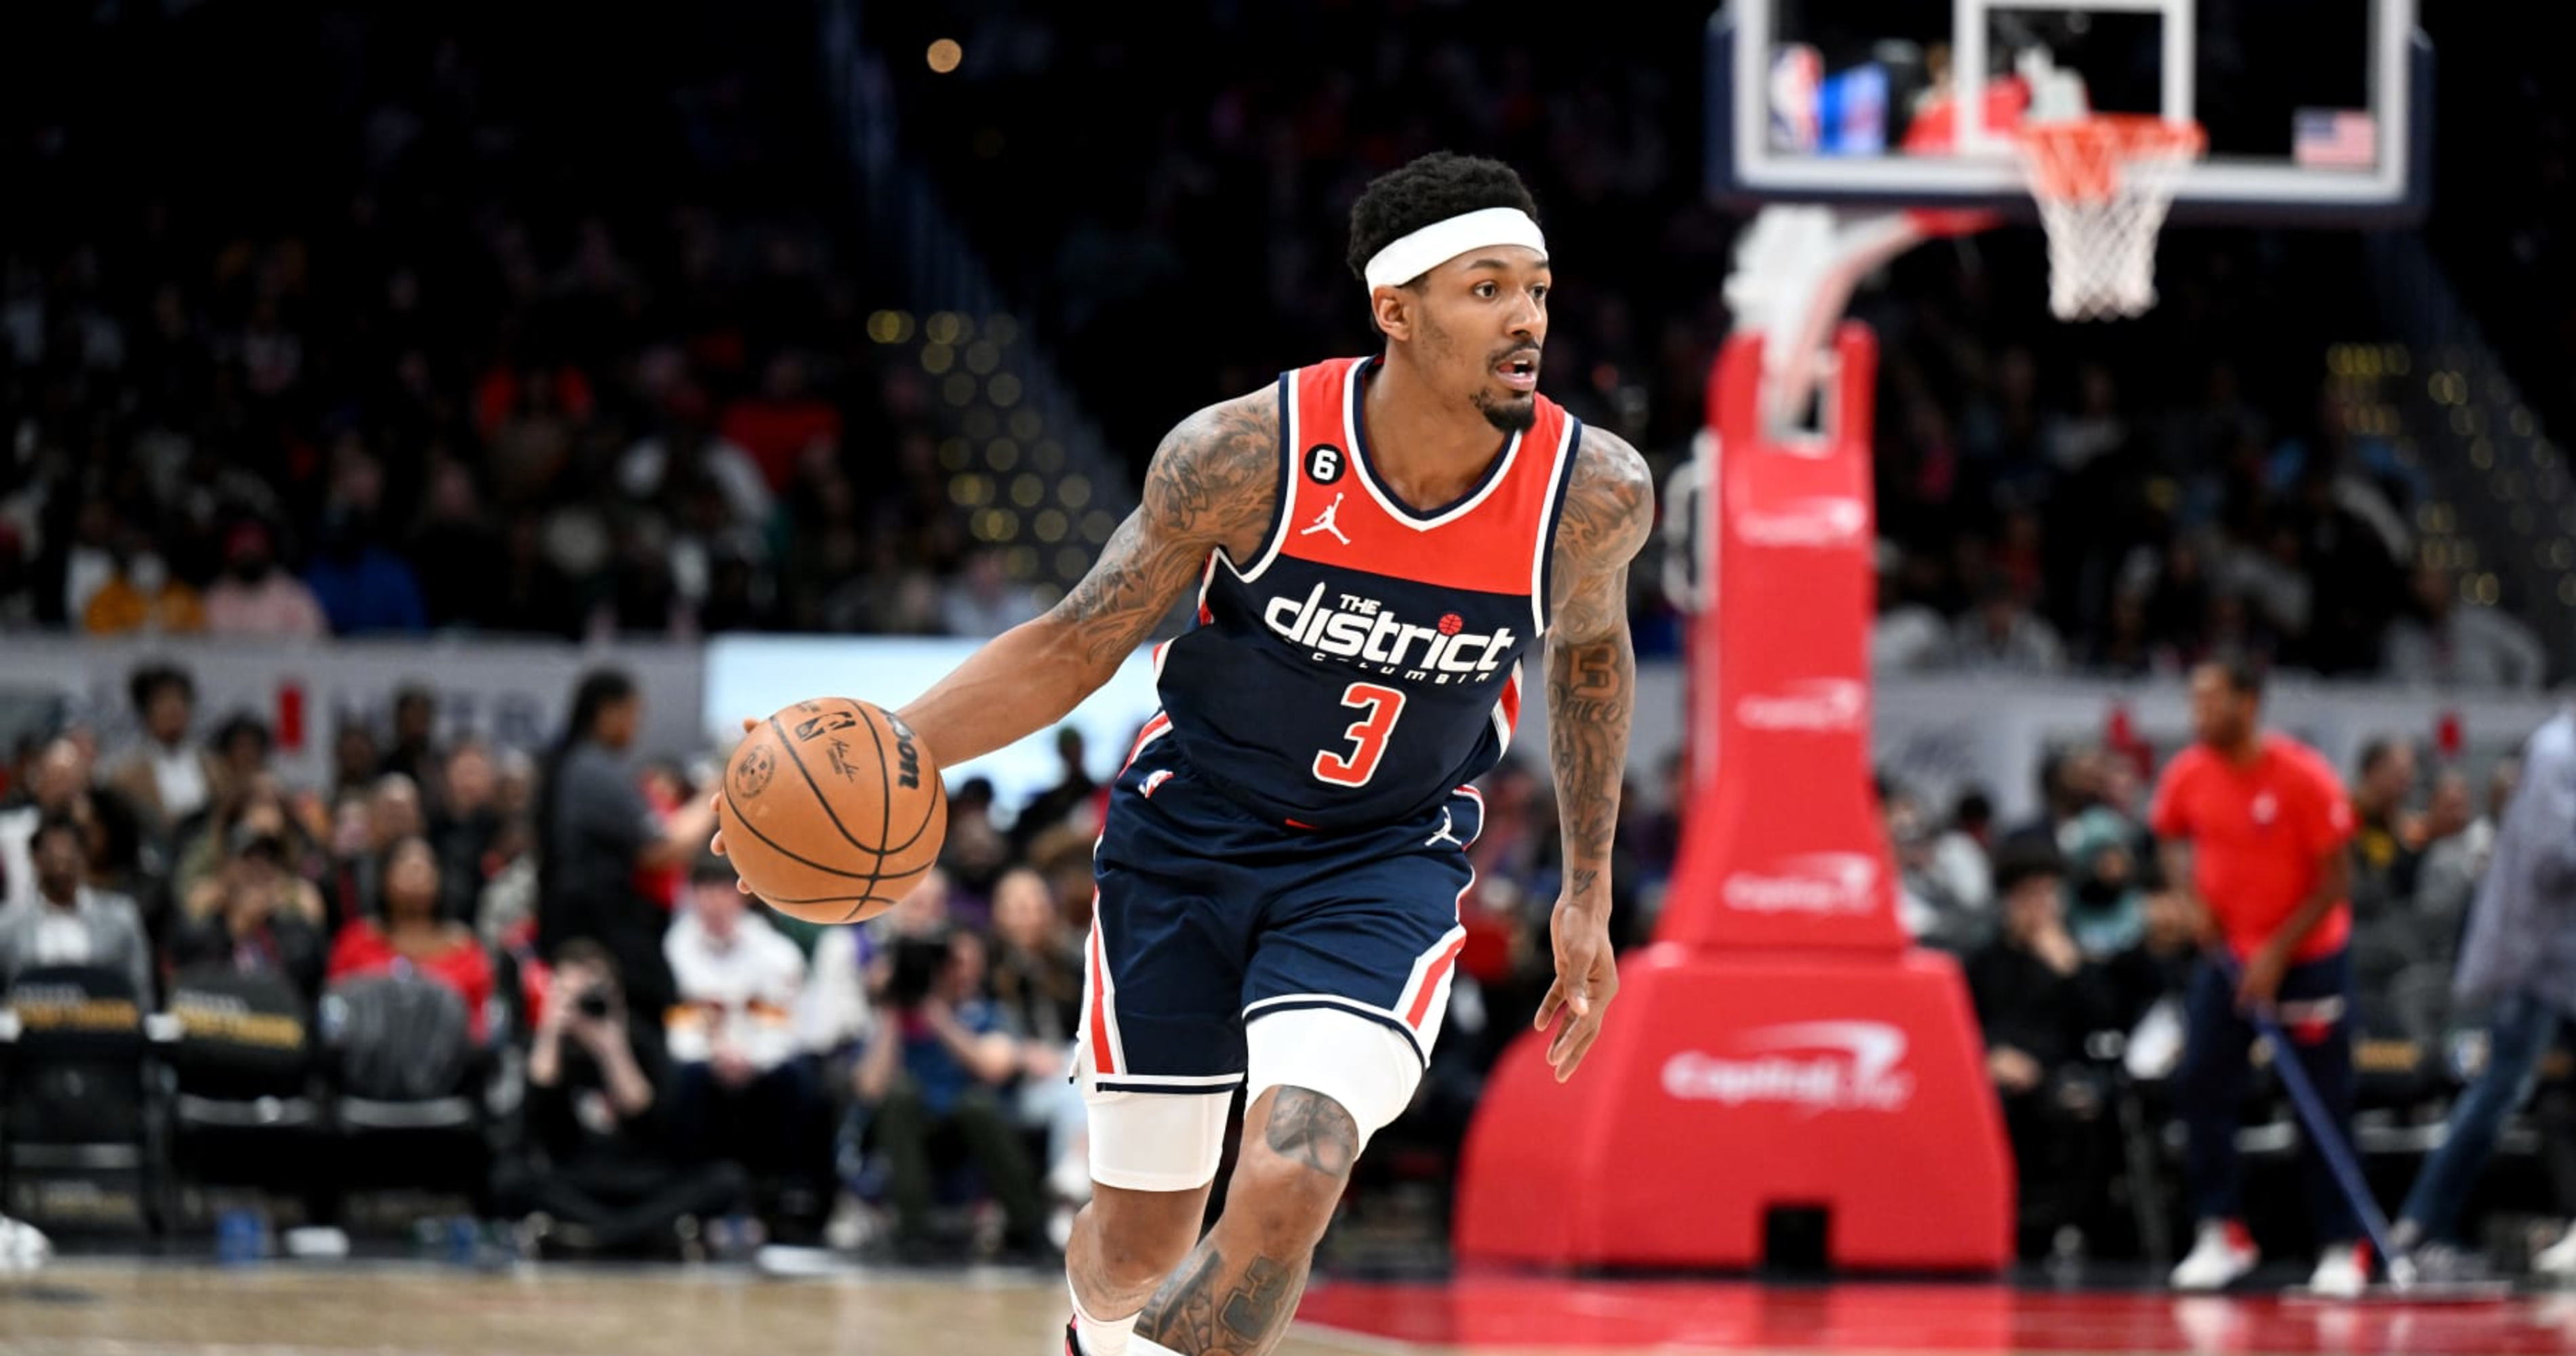 Beal's injury worries and large contract makes him a concern by potential teams.